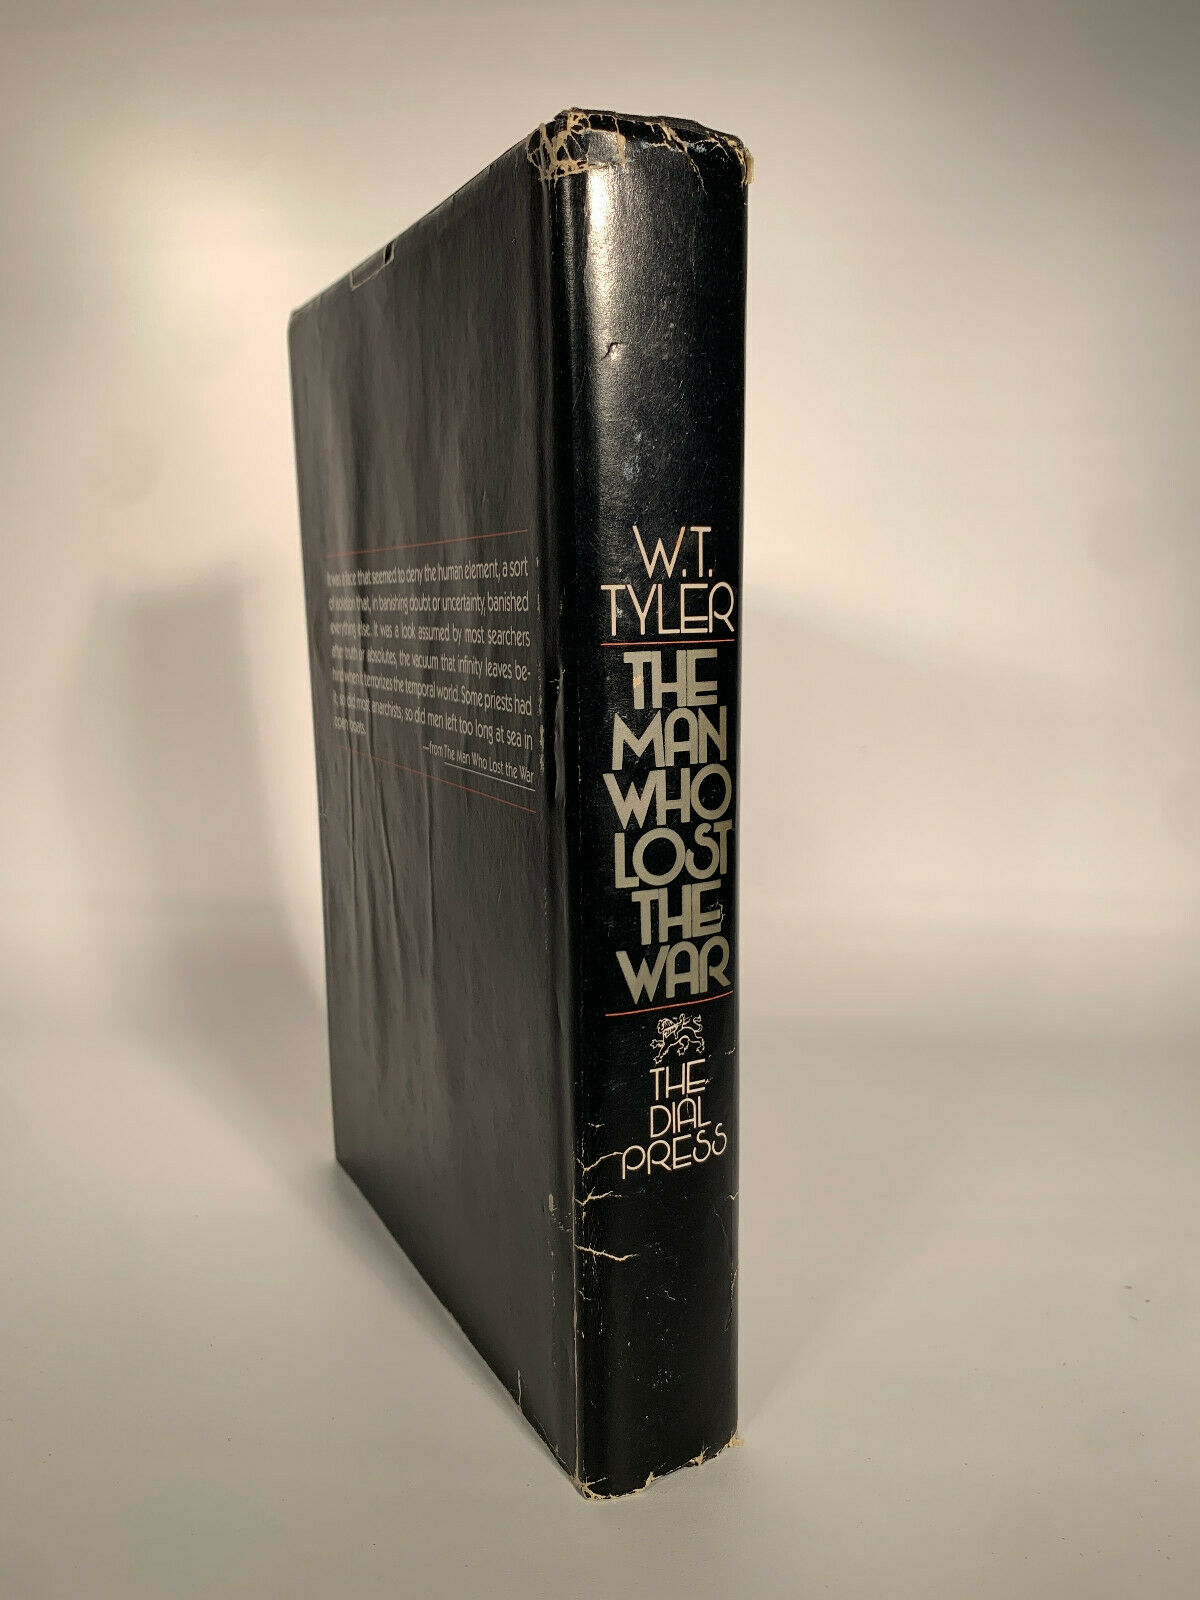 The Man Who Lost the War by W. T. Tyler  1980  hardcover 1st Printing